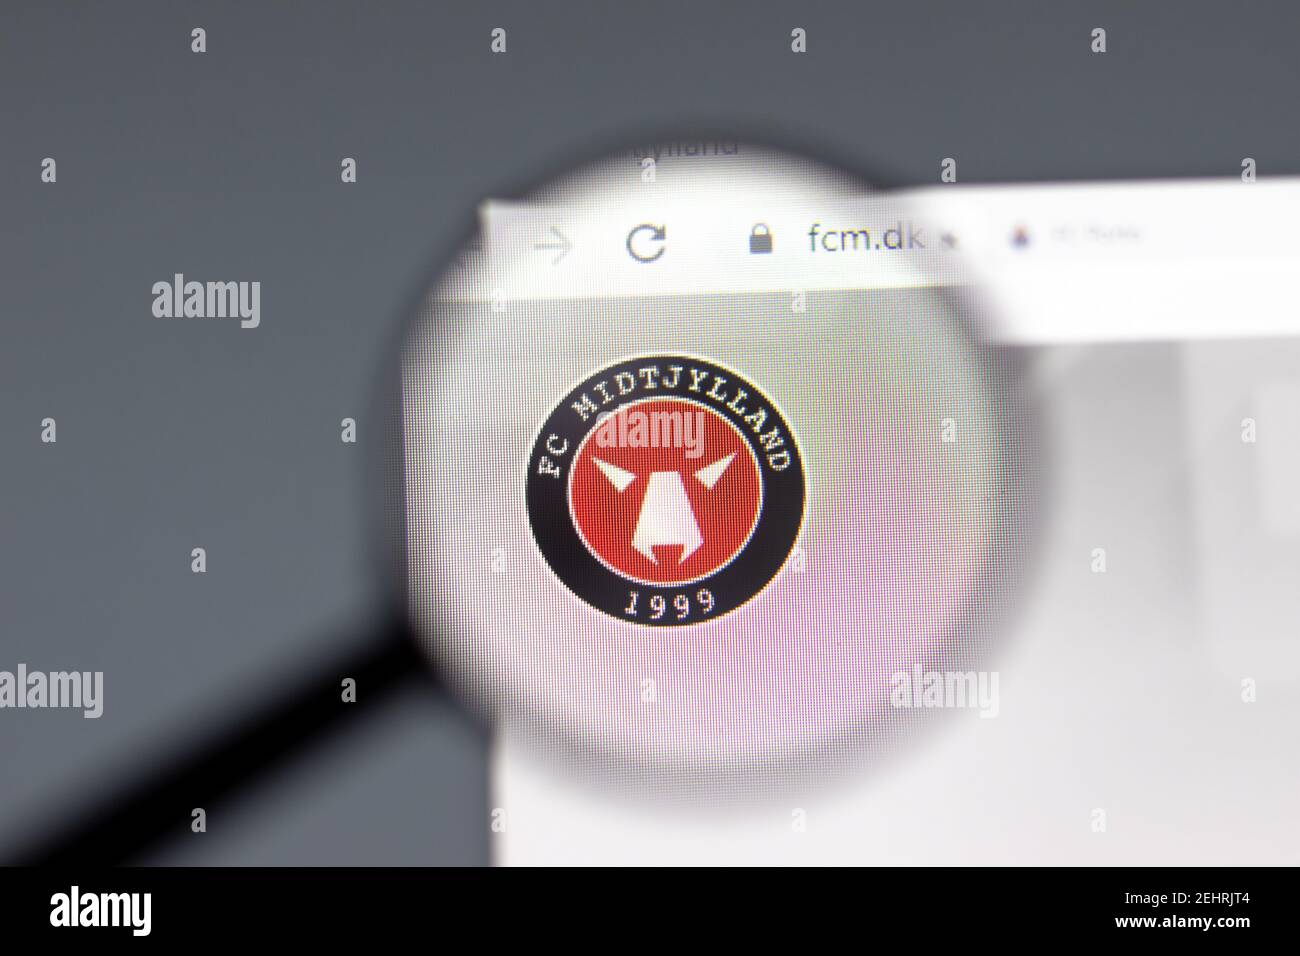 New York, USA - 15 February 2021: FC Midtjylland website in browser with company logo, Illustrative Editorial Stock Photo